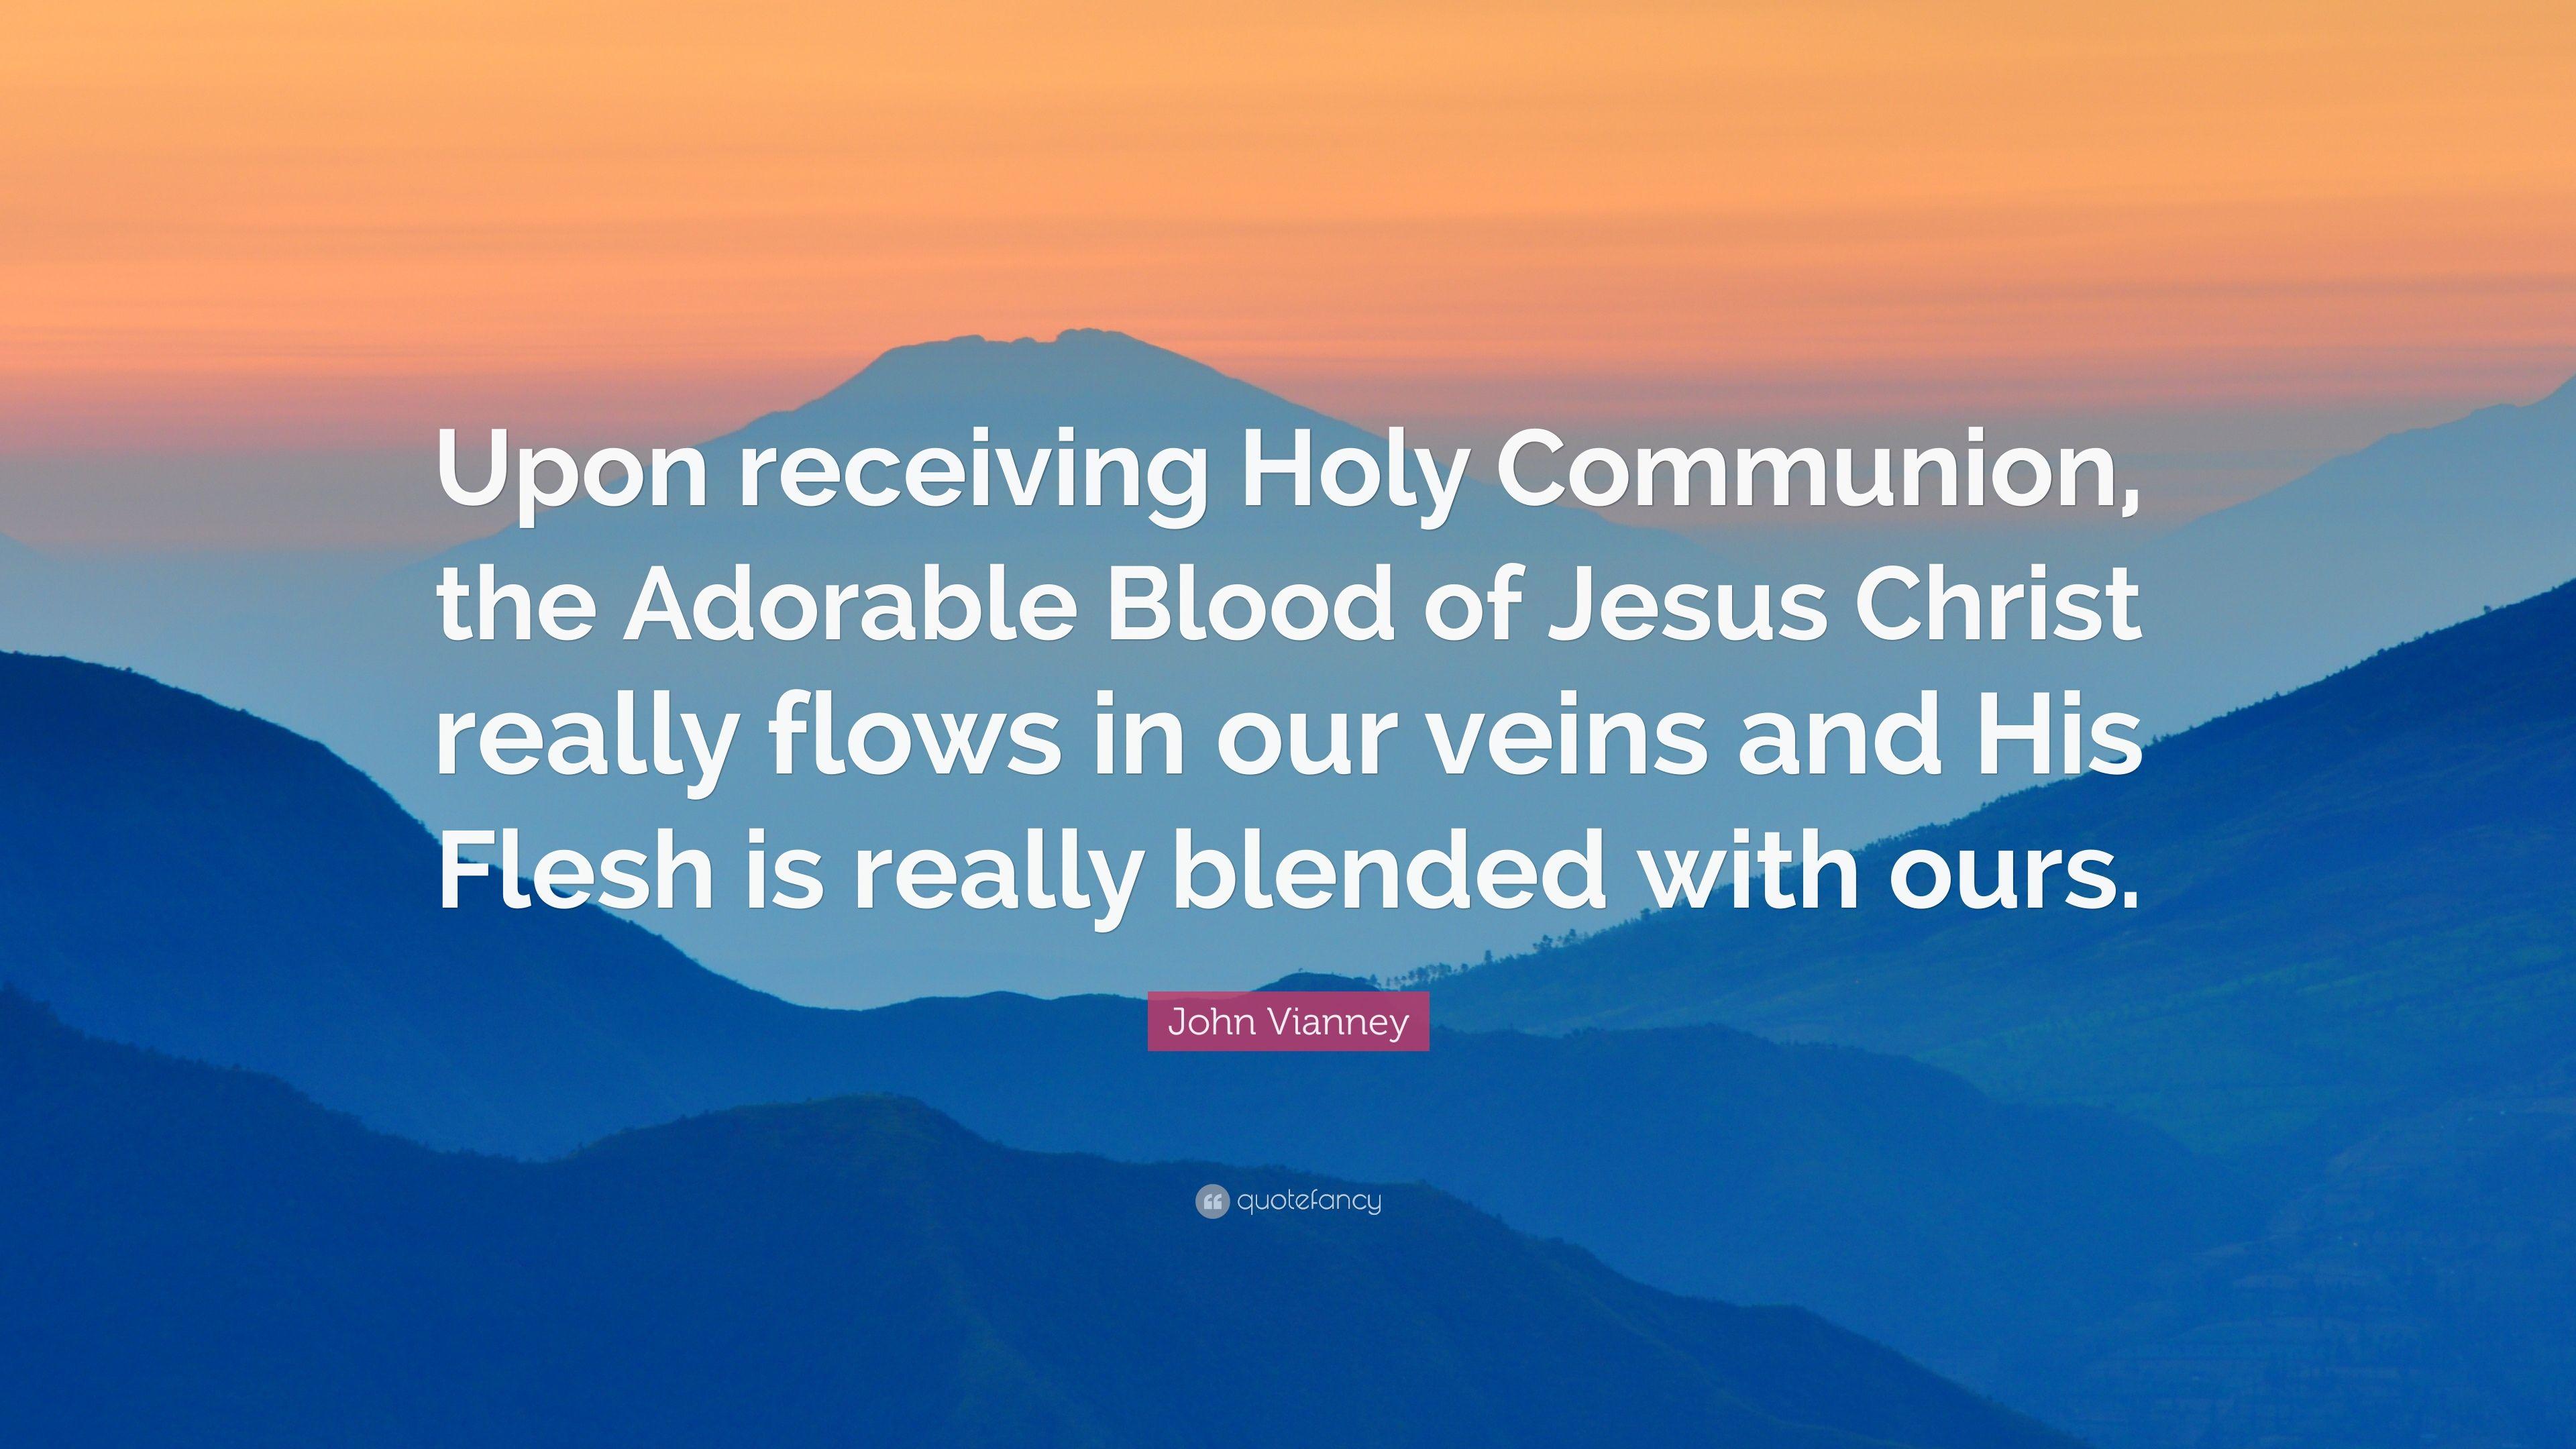 John Vianney Quote: “Upon receiving Holy Communion, the Adorable